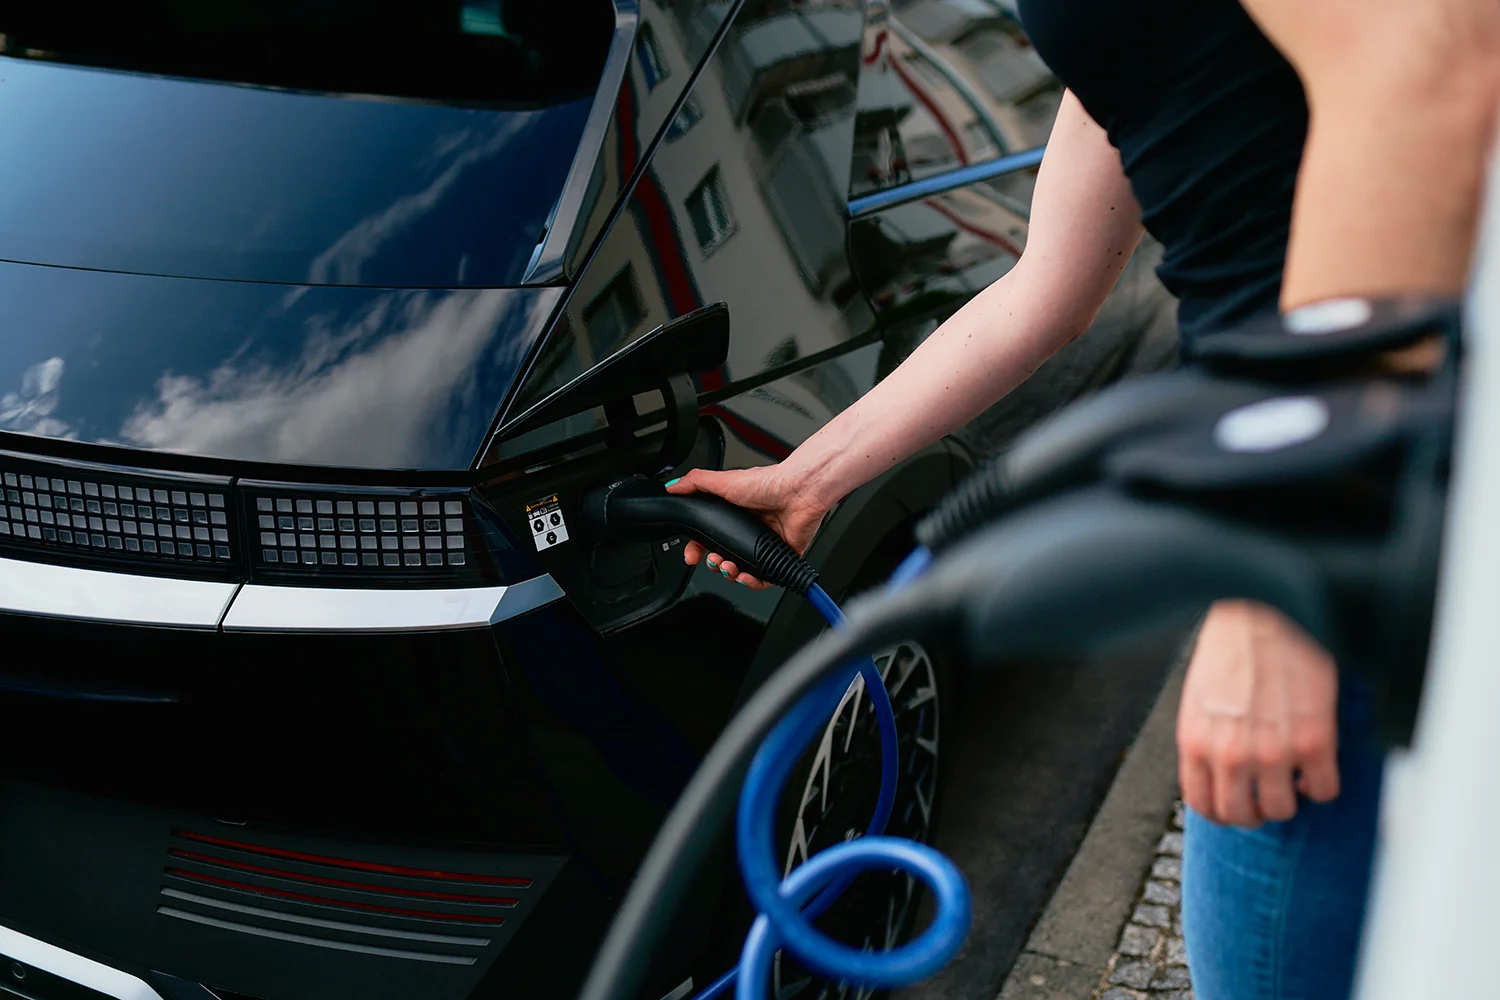 A driver of an electric vehicle is connecting her car to a public fast charger operated by ubitricity, at which she can pay with credit card, Apple Pay and Google Pay.